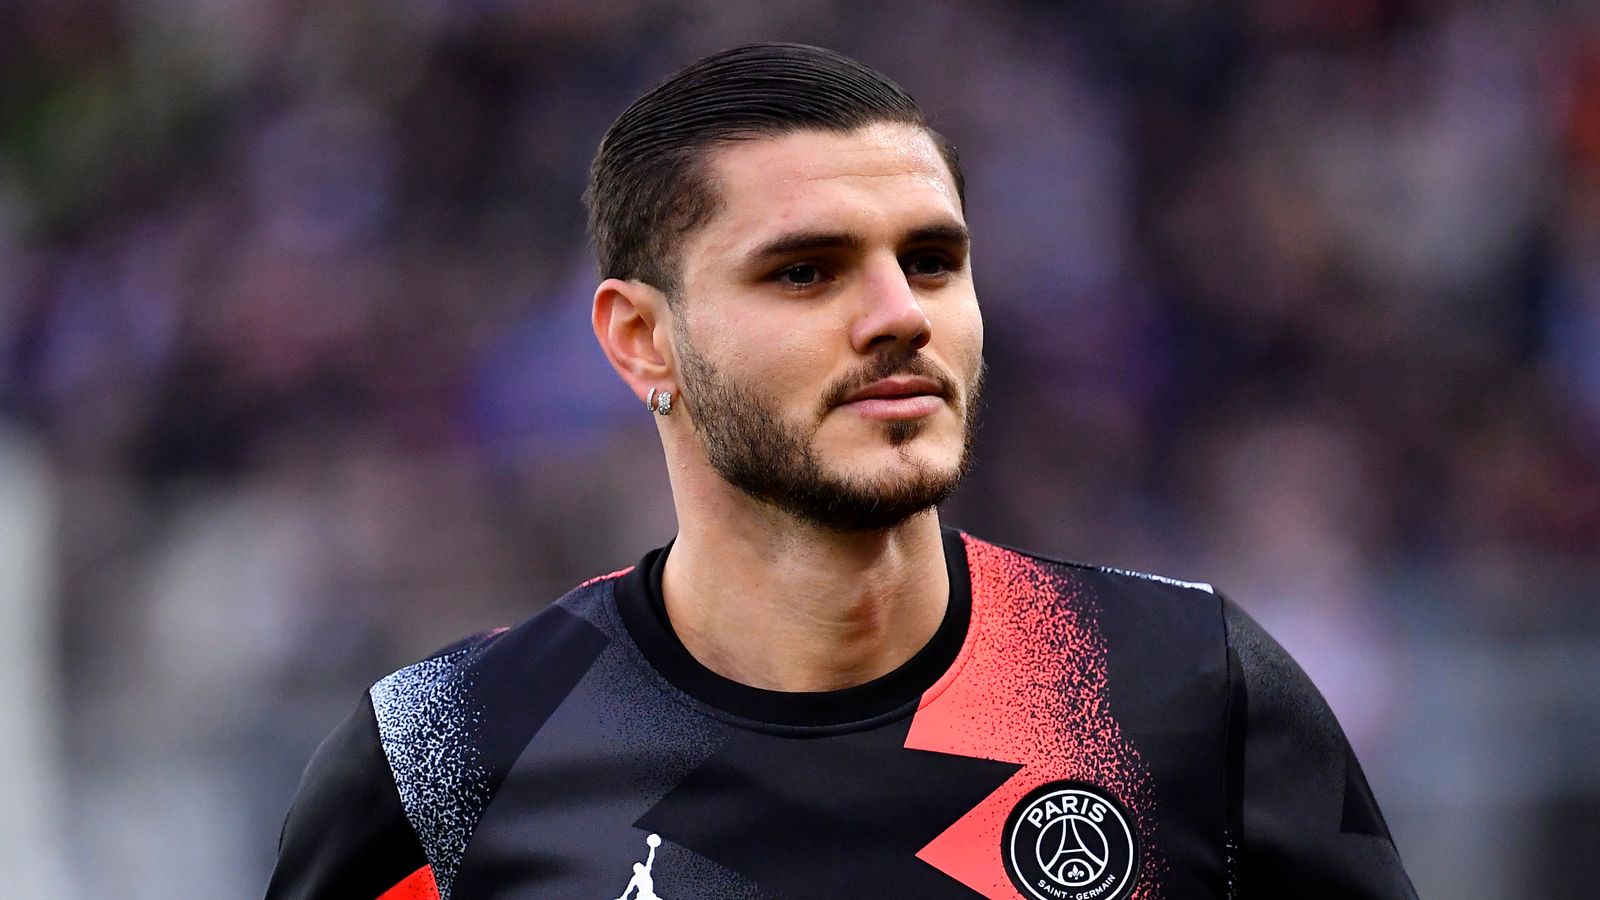 PSG opt to make Mauro Icardi's loan deal permanent from